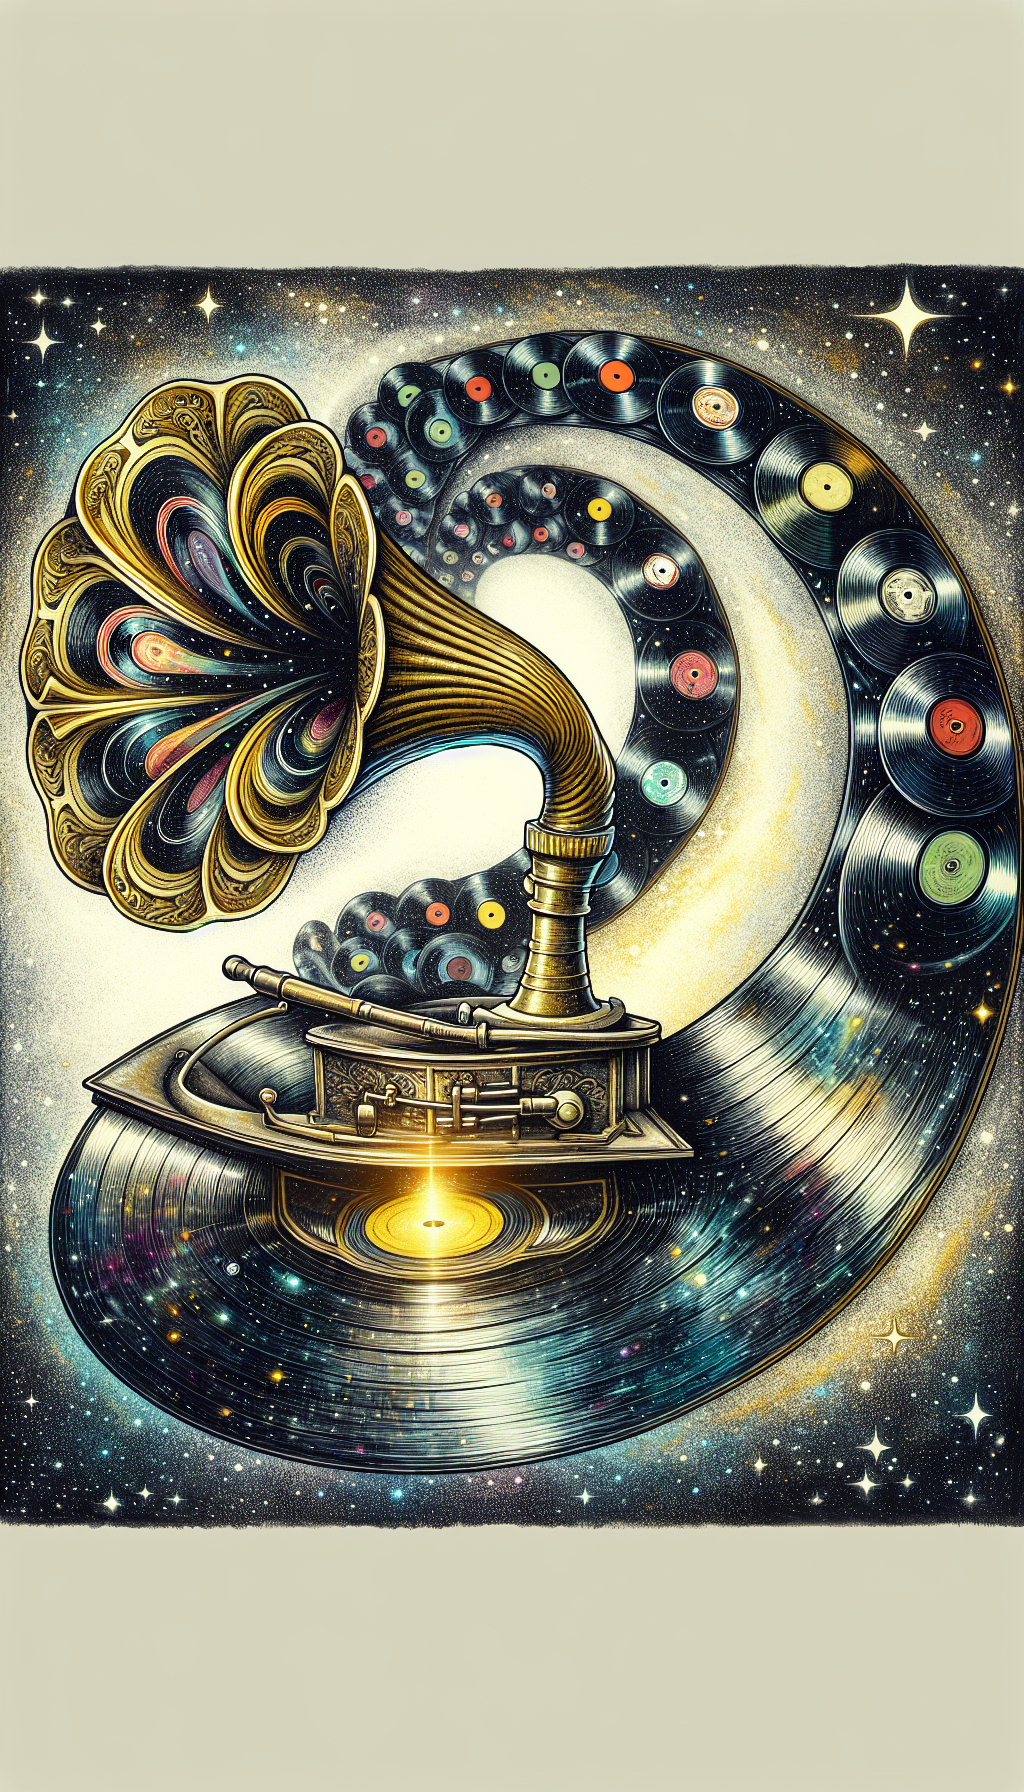 An illustration depicting an antique gramophone, its horn transitioning into a cosmic spiral of shimmering vinyl records, symbolizes 'The Allure of Aged Audiophilia.' At the spiral's center, a glowing golden record epitomizes 'old vinyl records value,' with diverse music genres and eras styled into each vinyl's label, showcasing the timeless journey and appeal of vintage vinyl collecting.